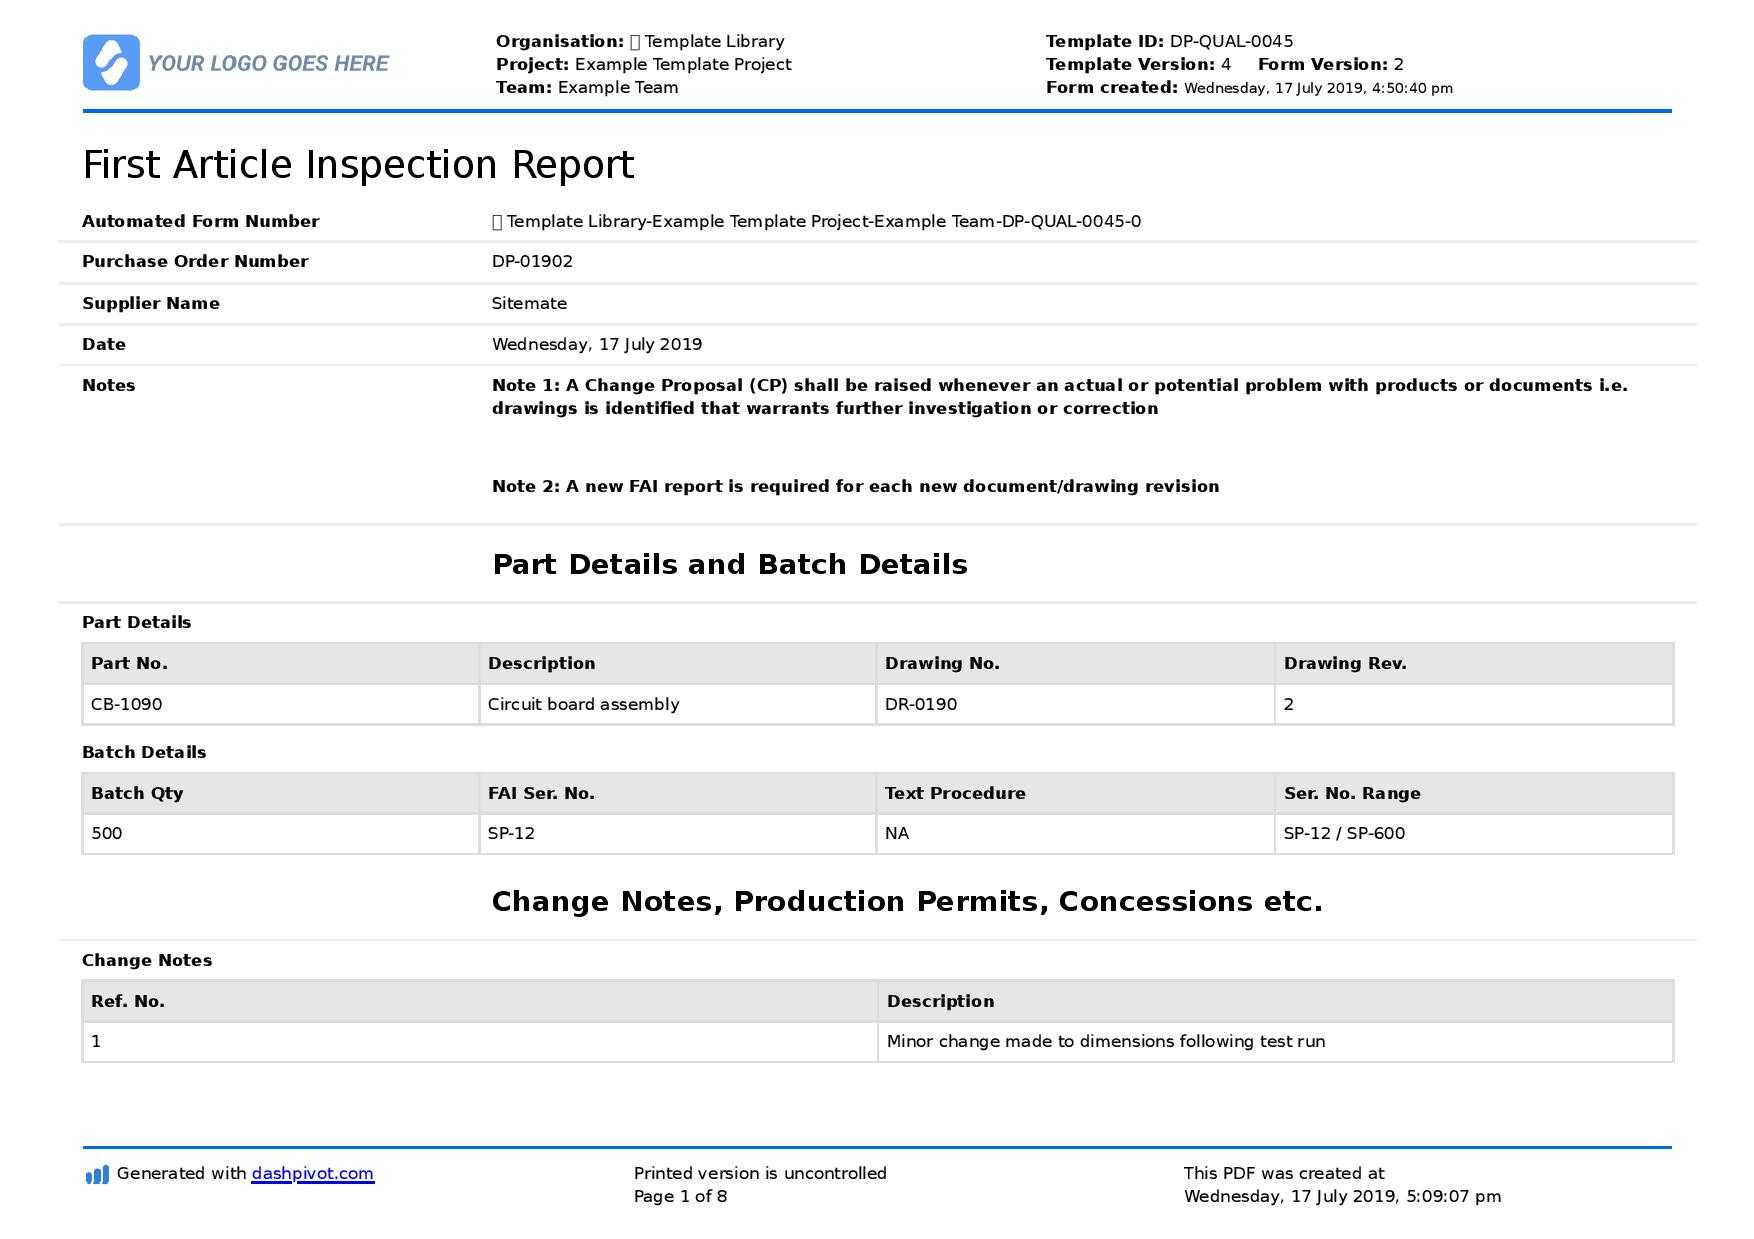 First Article Inspection Form Template: Free & Editable For Engineering Inspection Report Template